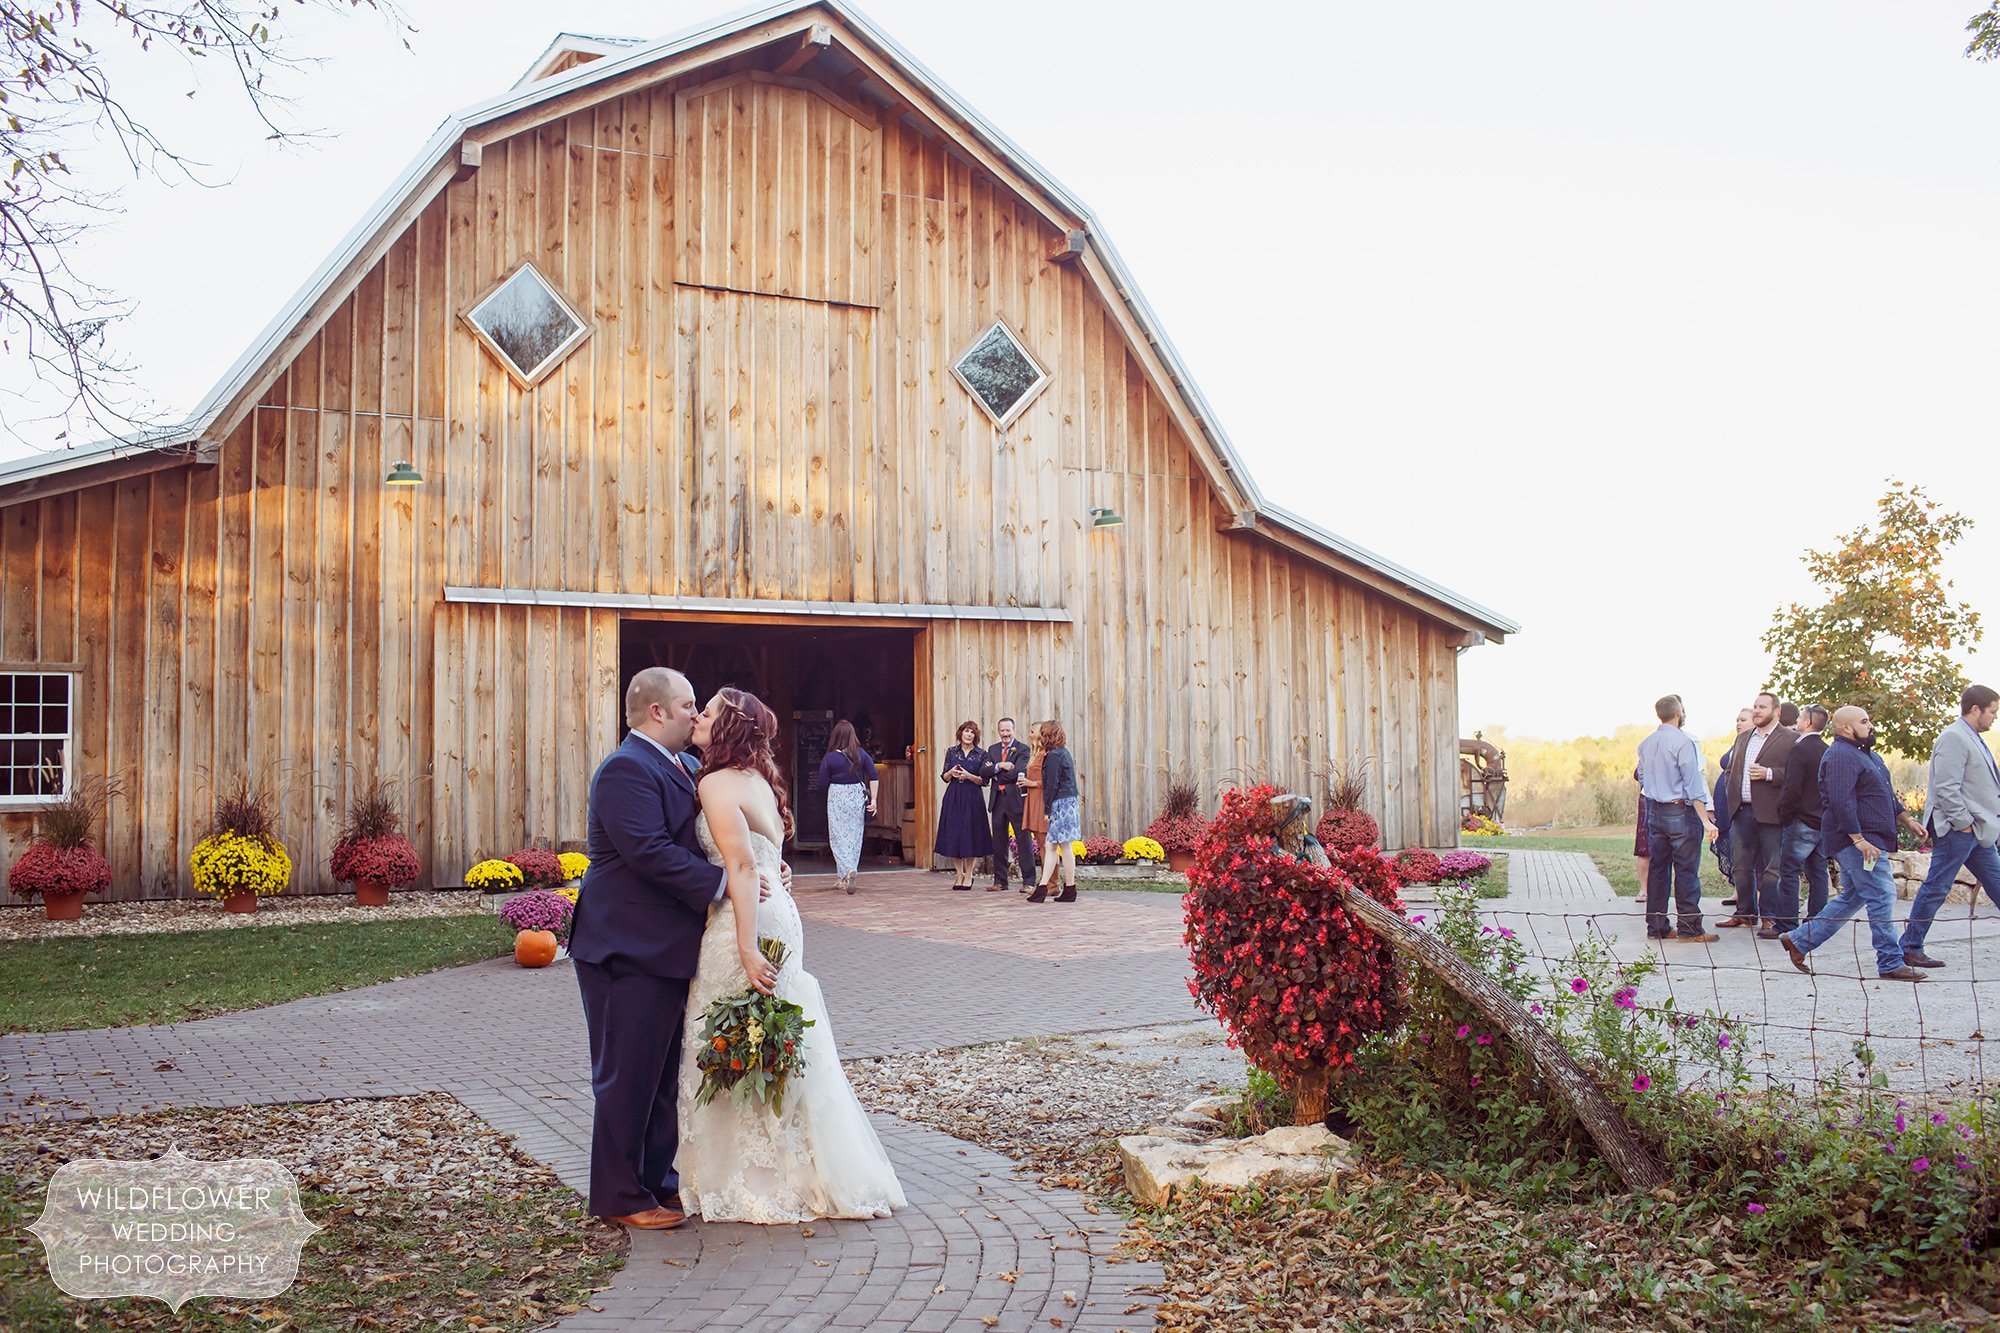 View of the Schwinn Produce Farm and a bride and groom kissing in front of the large reception barn.